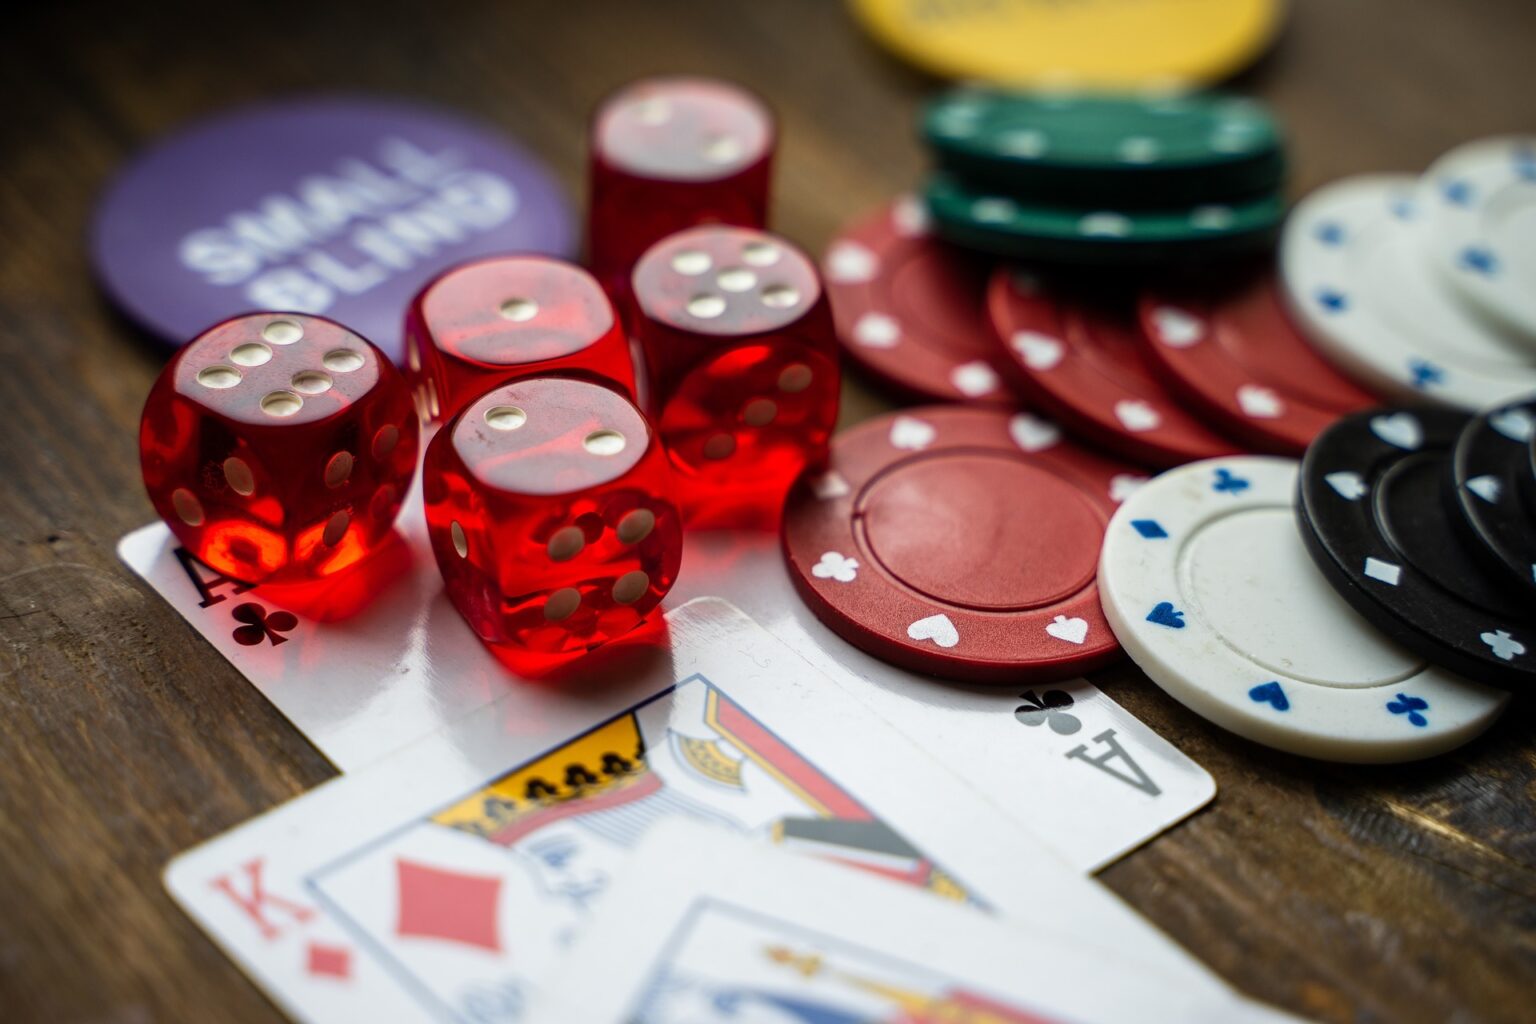 In this post, we have given you a list of the 2 best online casinos in India that are safe and secure for playing games. Let's dive in.